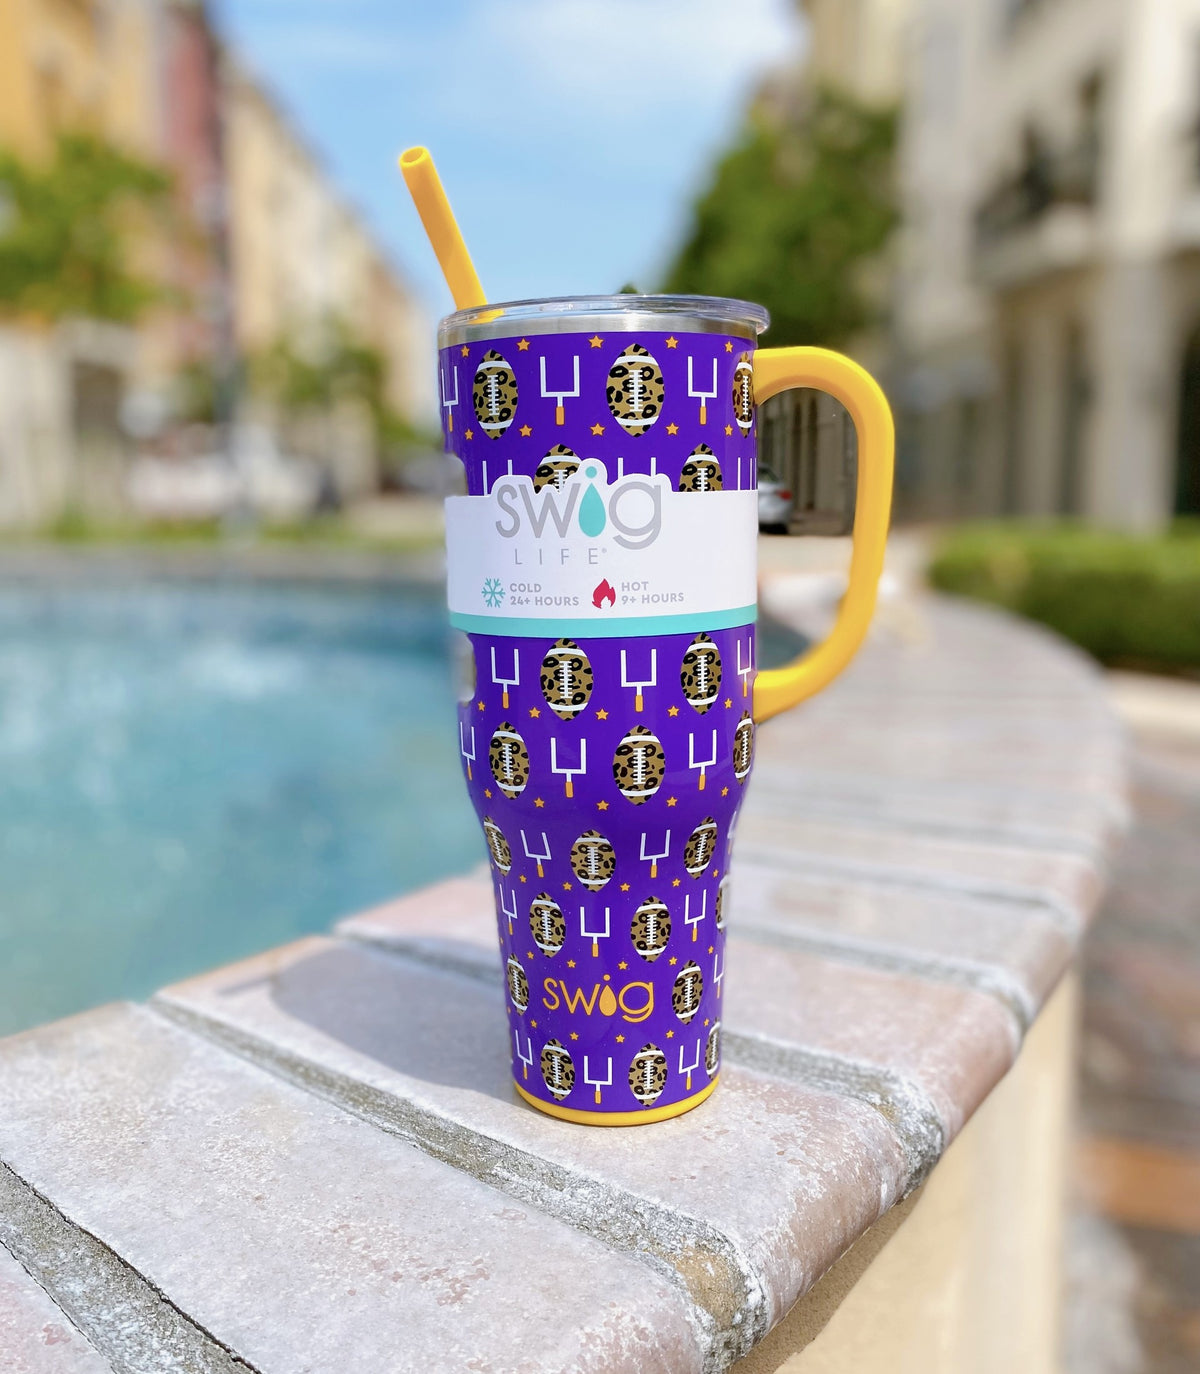 https://www.shopcarolineandco.shop/wp-content/uploads/1692/97/explore-swig-40-oz-mega-mug-touchdown-purple-gold-swig-and-many-more-shop-for-less-in-our-store_0.jpg